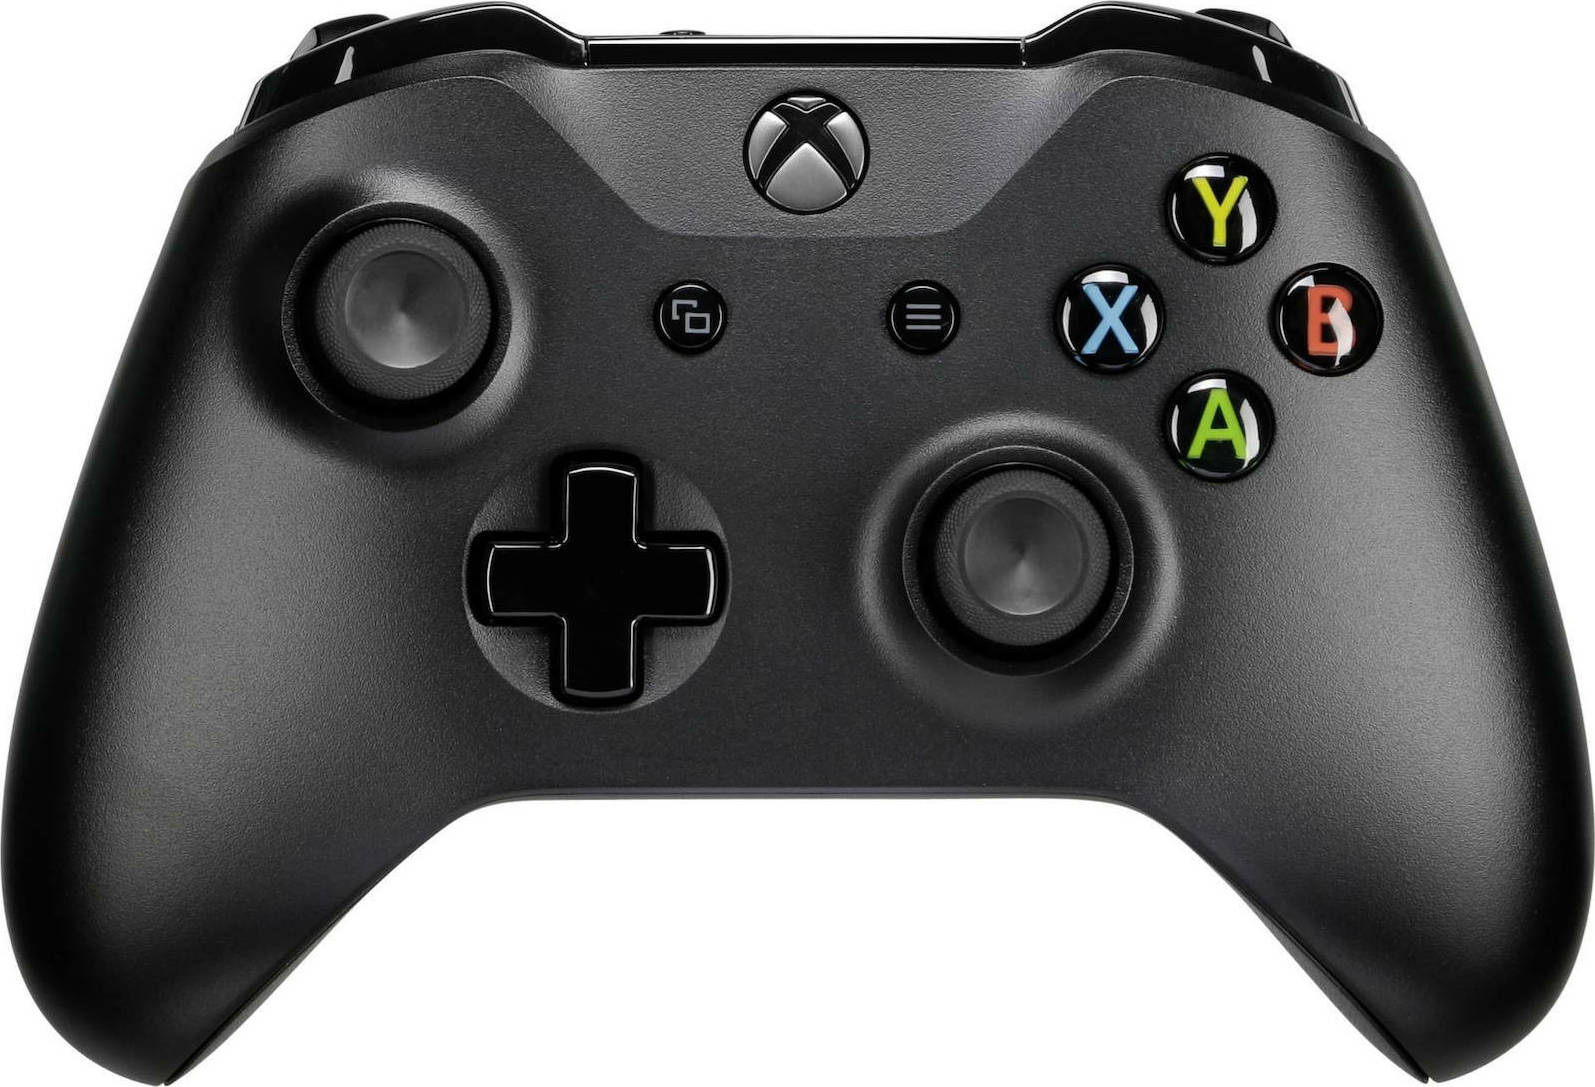 Microsoft Xbox 360 Wireless Controller. Xbox one Controller. Xbox one Wireless Black. Xbox 360 Wireless networking Adapter. Xbox one s controller